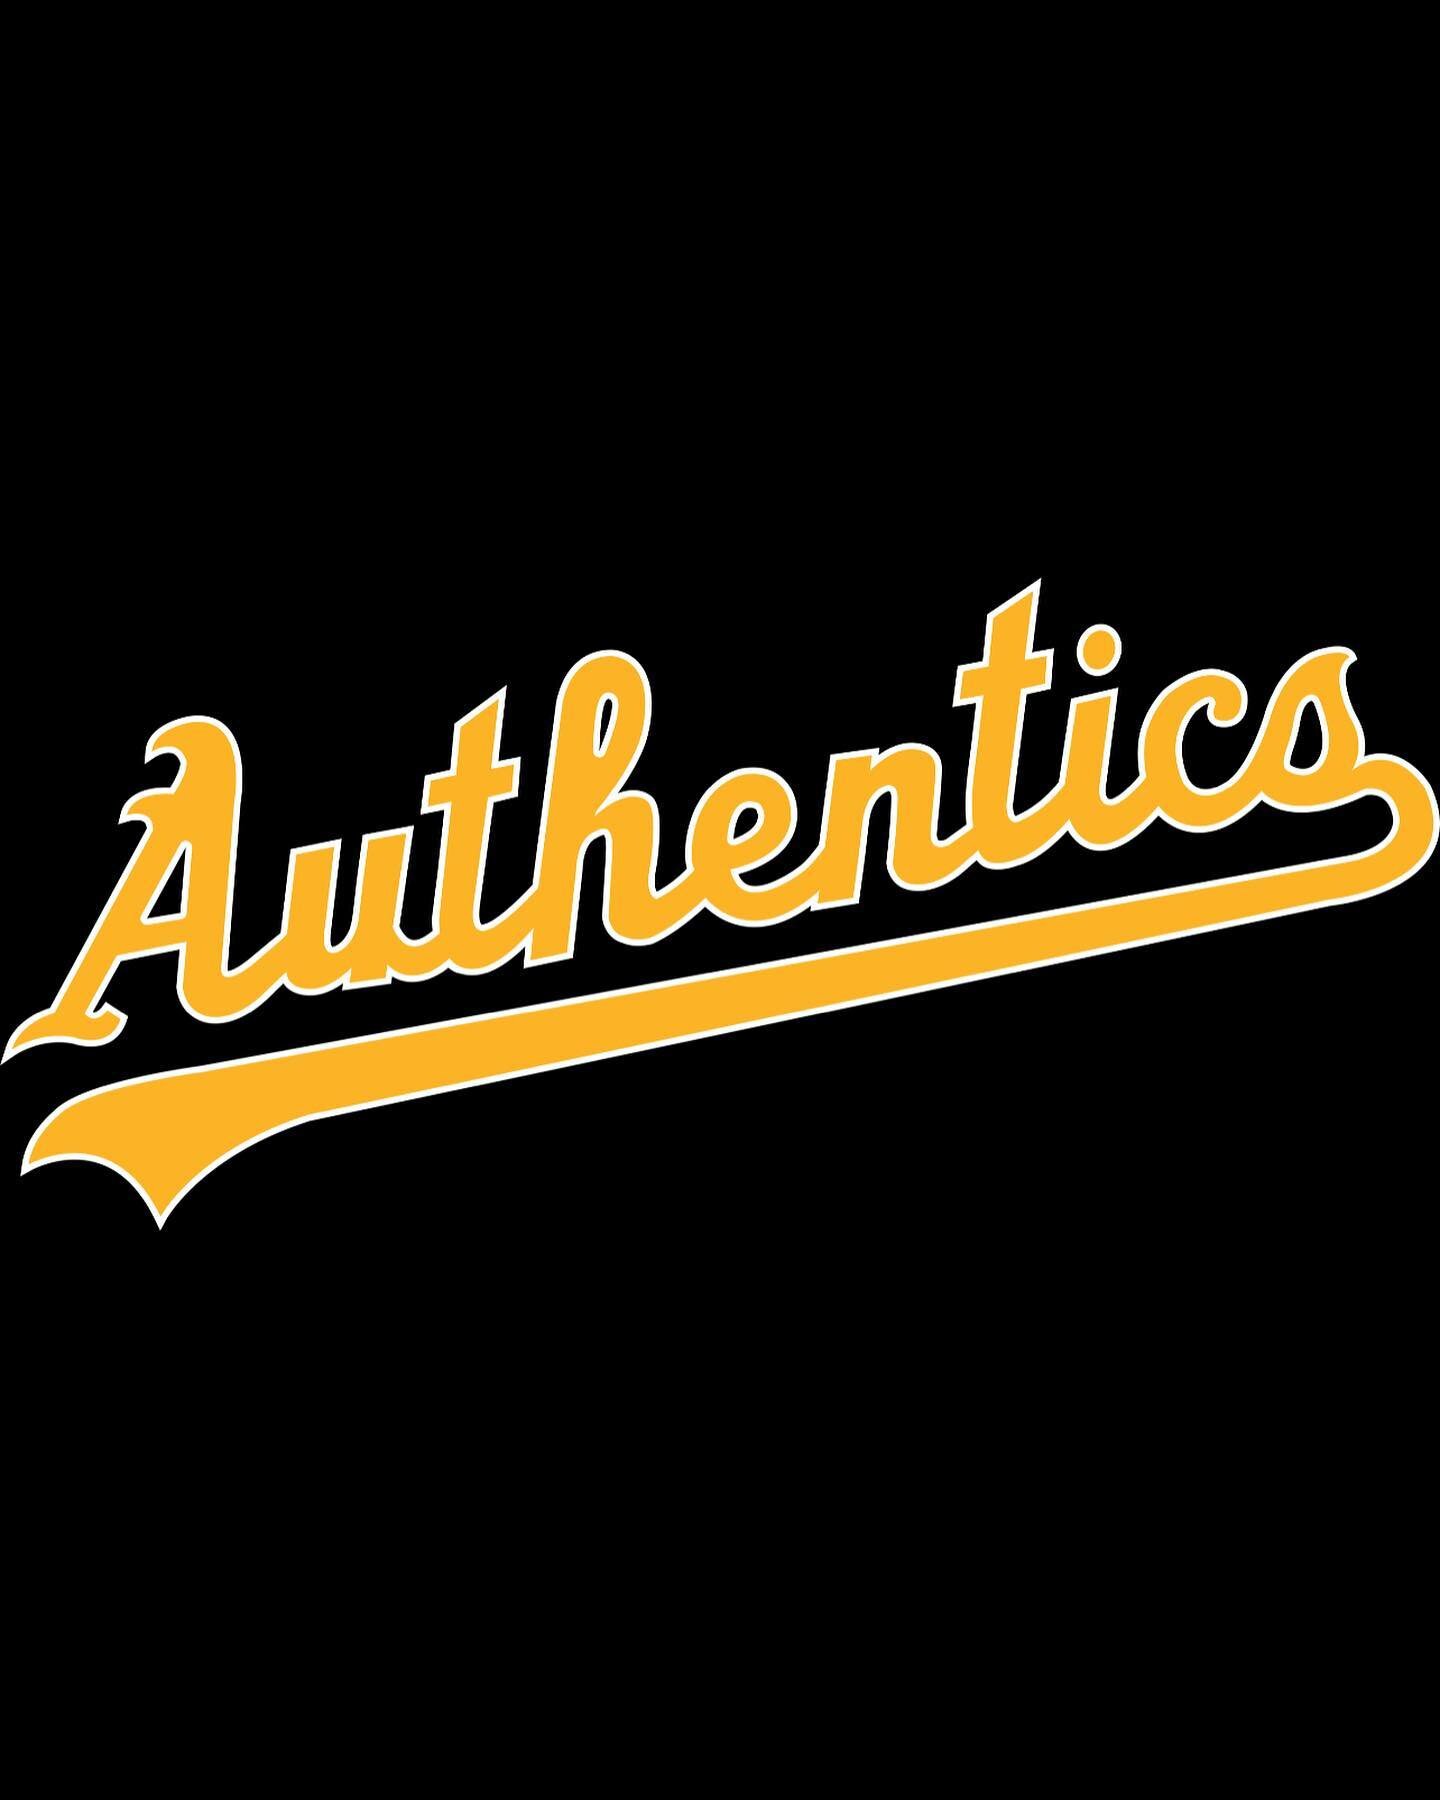 2916 #Fruitvale Ave #OaklandCalifornia 
9/23/22 12:30pm to 5:30pm 🌳

#OaklandAuthentics #Oakland #AuthenticOakland #OaklandsOwn The Unmarketed!